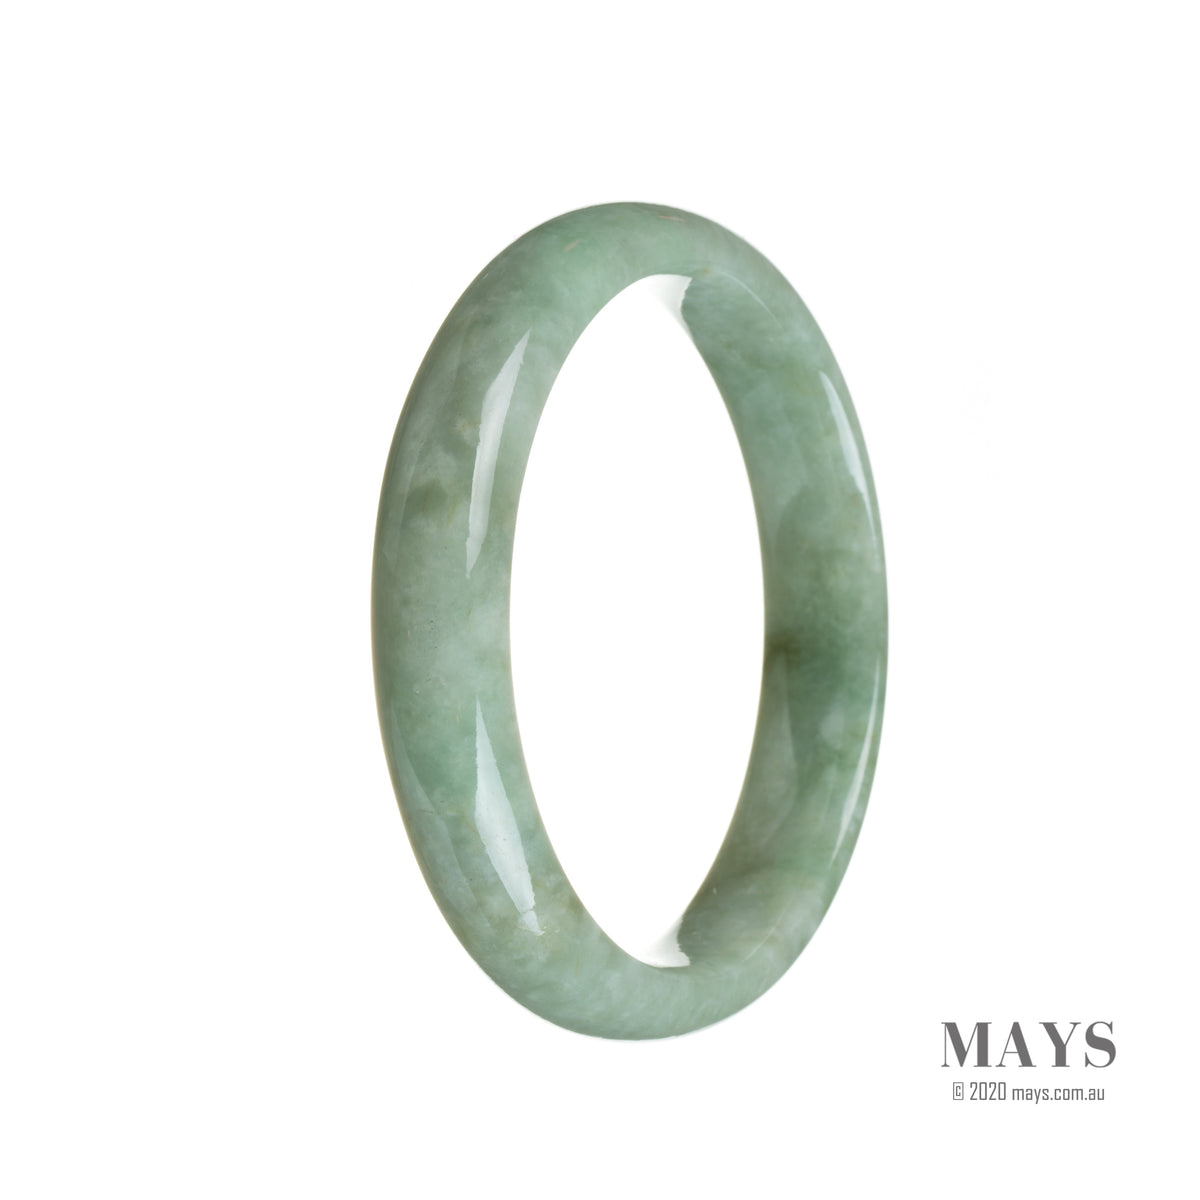 A close-up image of a delicate green bracelet made of certified natural light green Burma Jade. The bracelet features semi-round beads measuring 56mm in diameter. Created by MAYS GEMS.